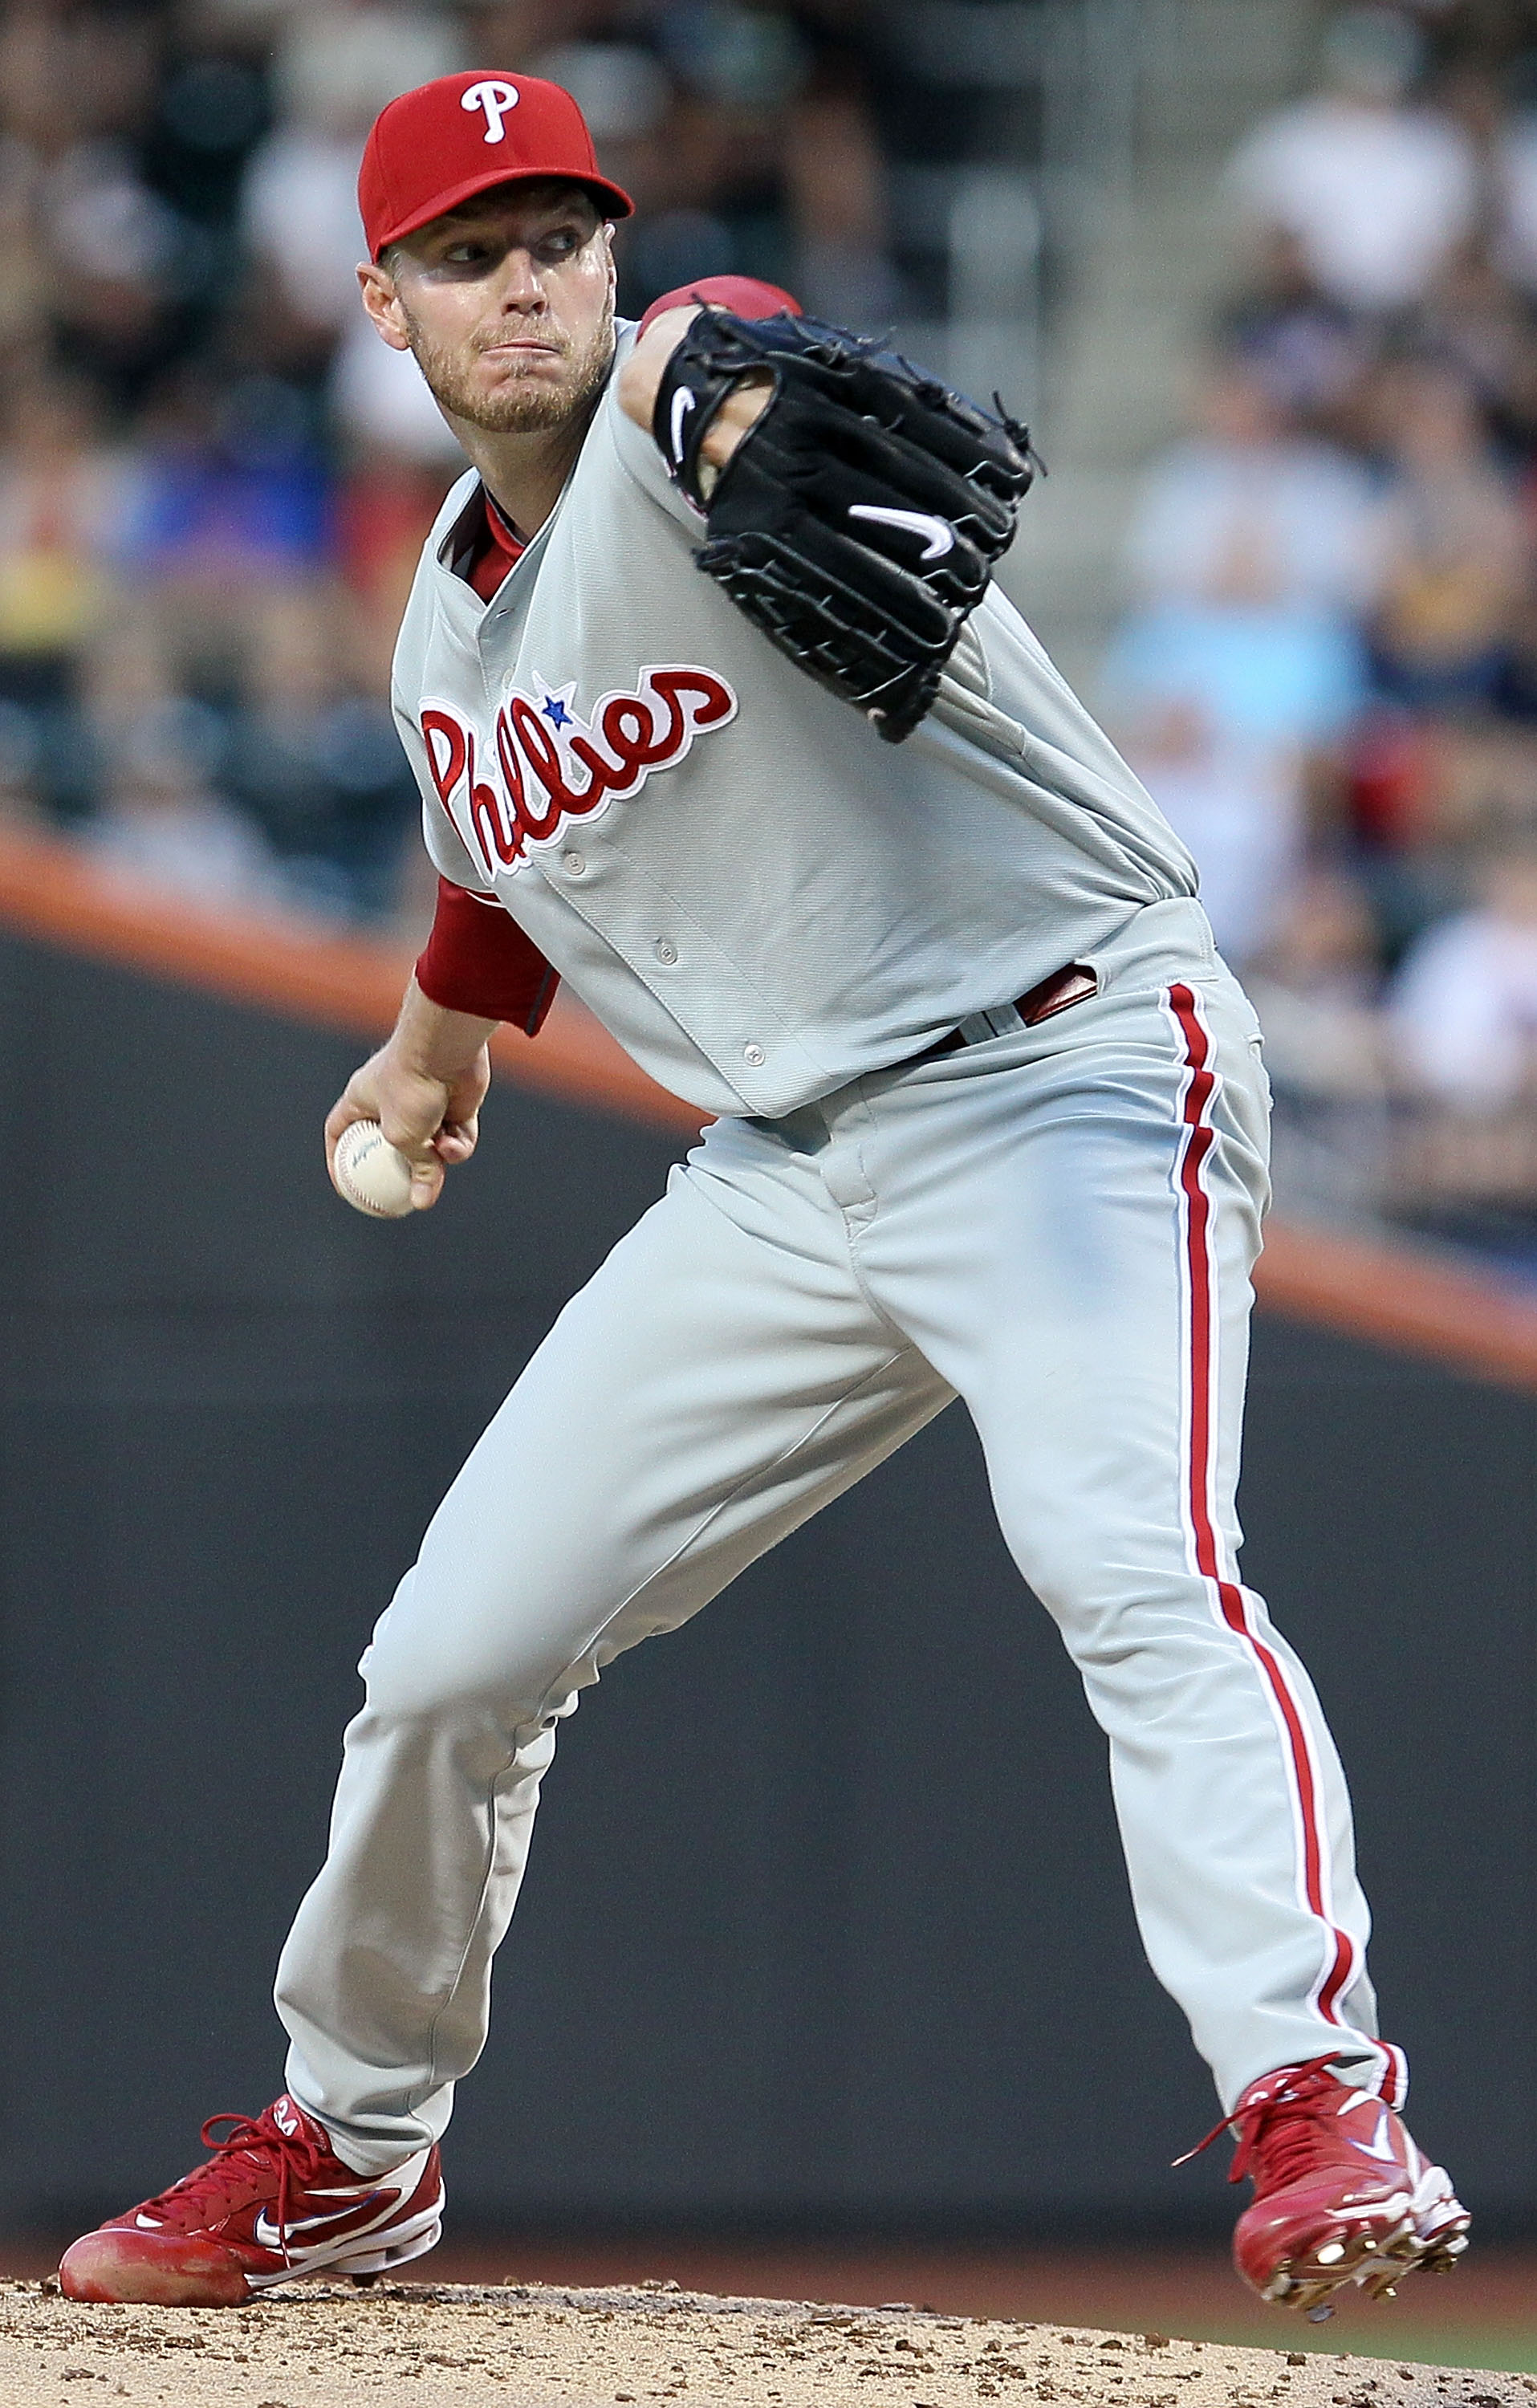 NEW YORK - AUGUST 14:  Roy Halladay #34 of the Philadelphia Phillies delivers a pitch against the New York Mets on August 14, 2010 at Citi Field in the Flushing neighborhood of the Queens borough of New York City.  (Photo by Jim McIsaac/Getty Images)